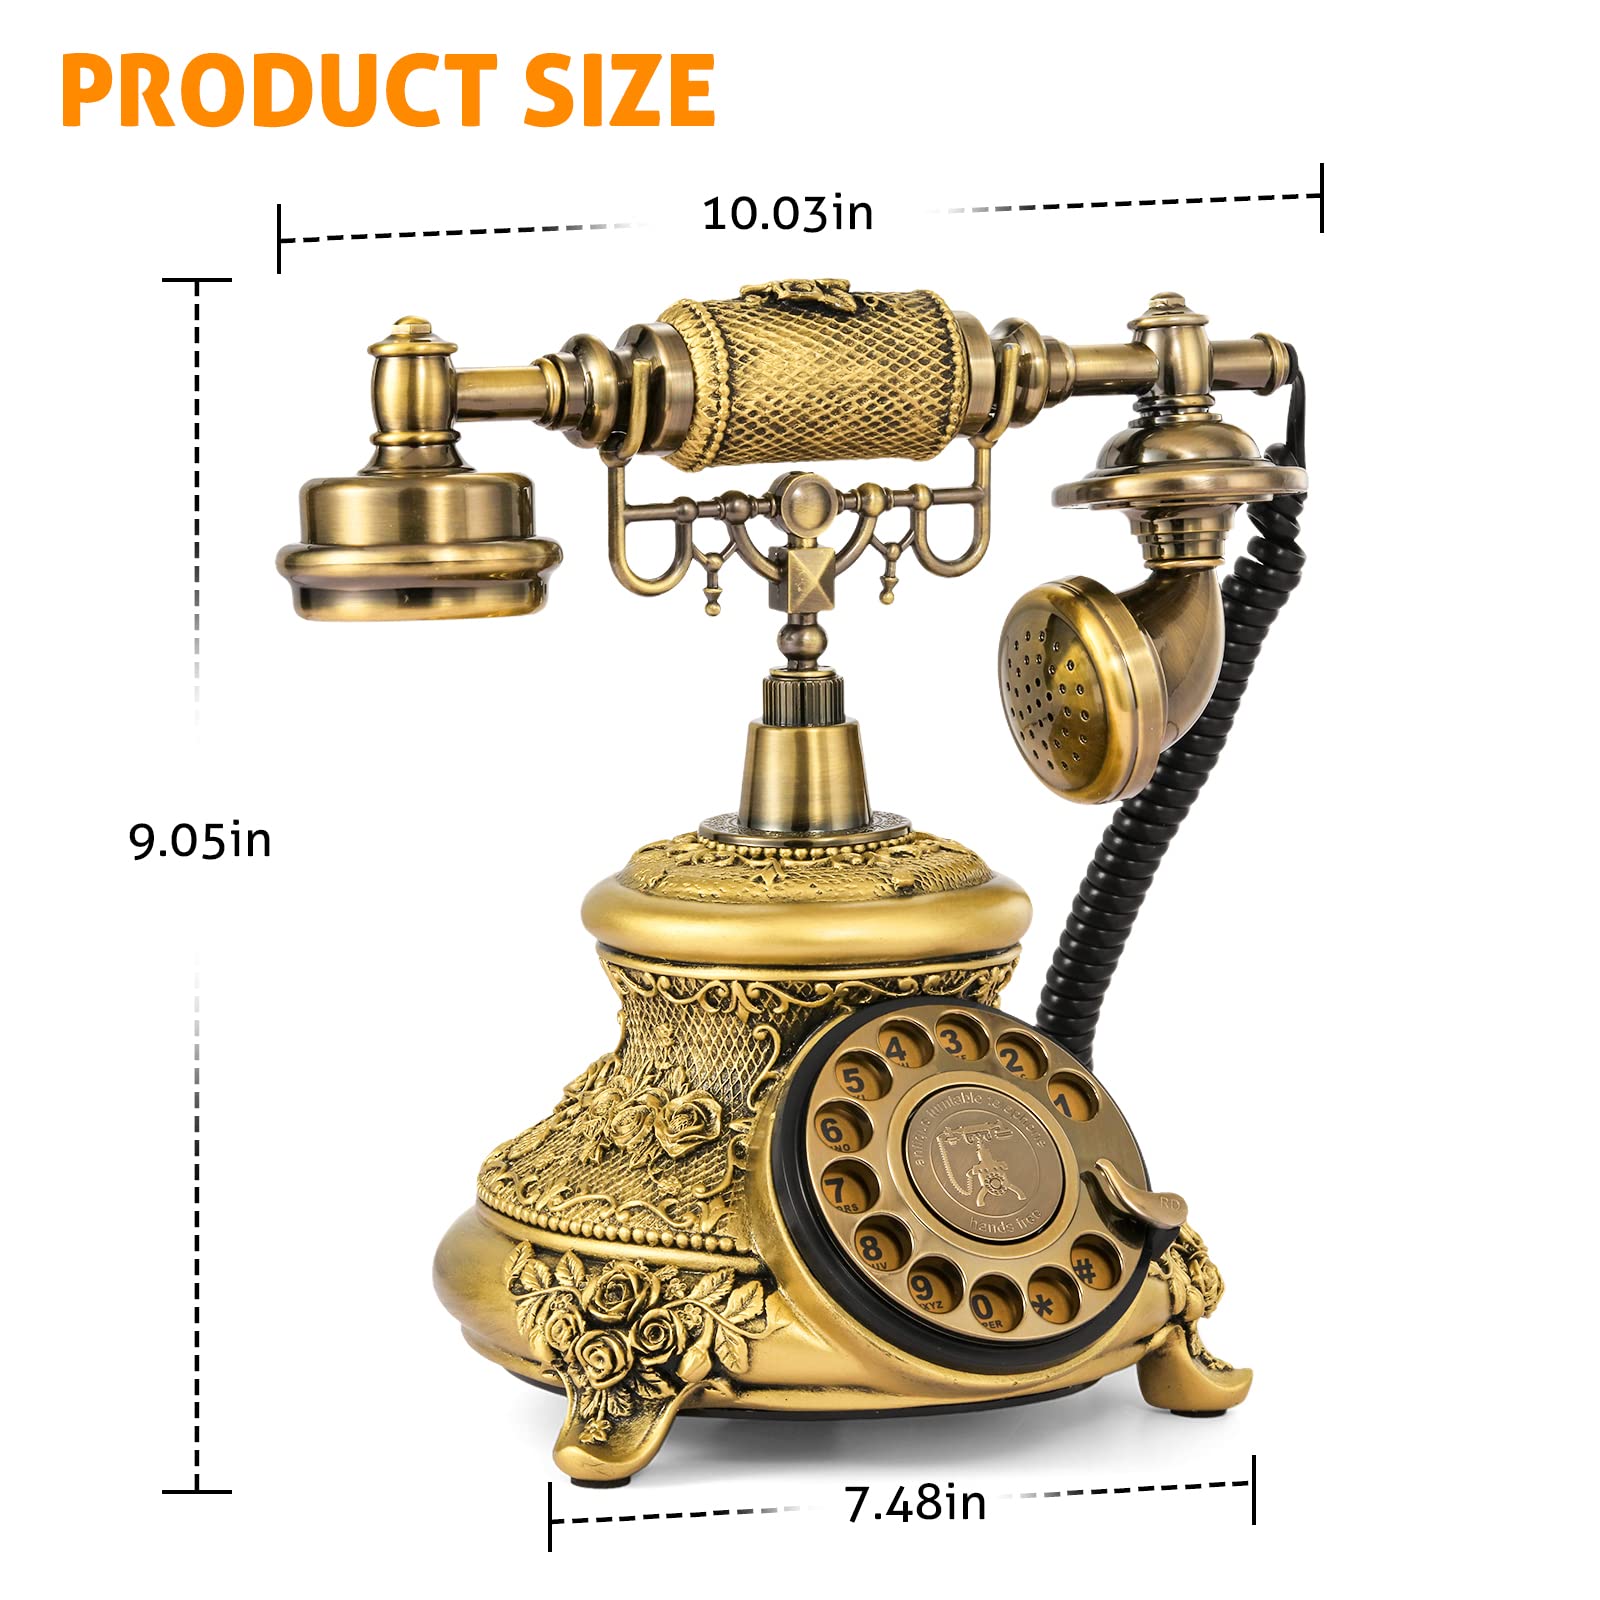 WICHEMI Vintage Phone Retro Rotary Dial Phone Landline Telephone Old Fashion Antique Phone Old School Telephones for Home Office Cafe Bar Star Hotel Decor (Golden)